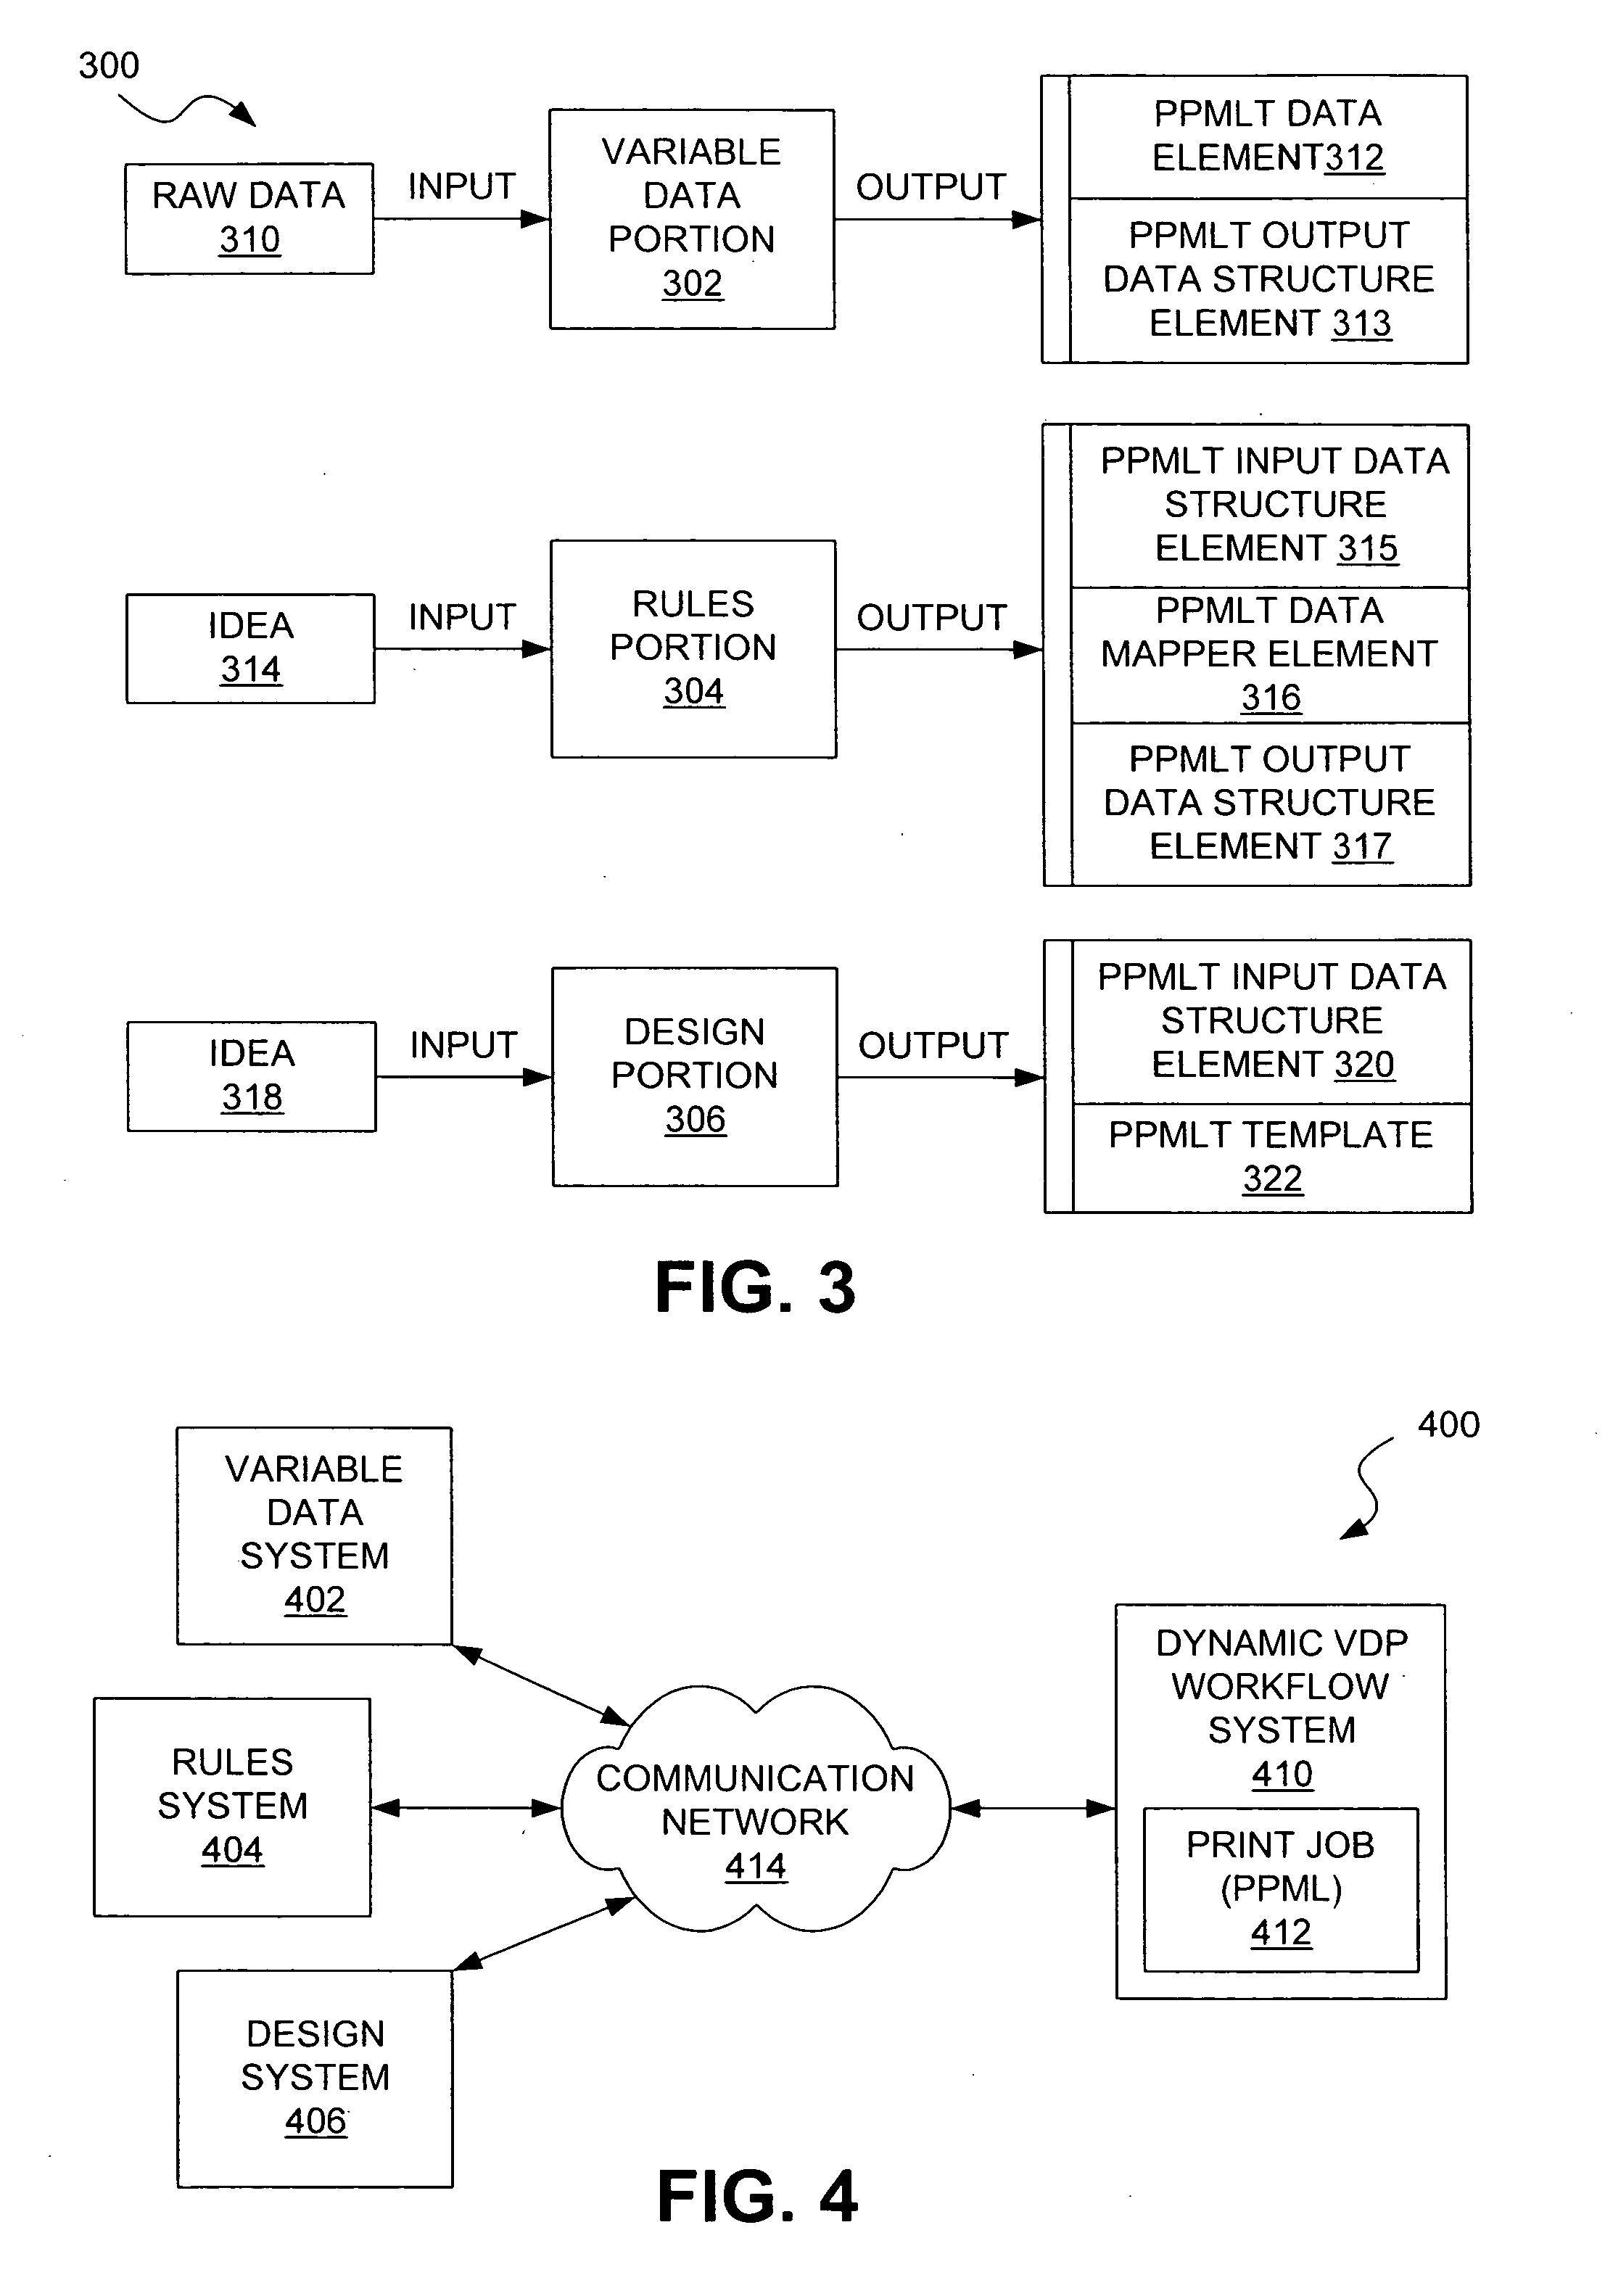 Systems and methods for performing variable data printing